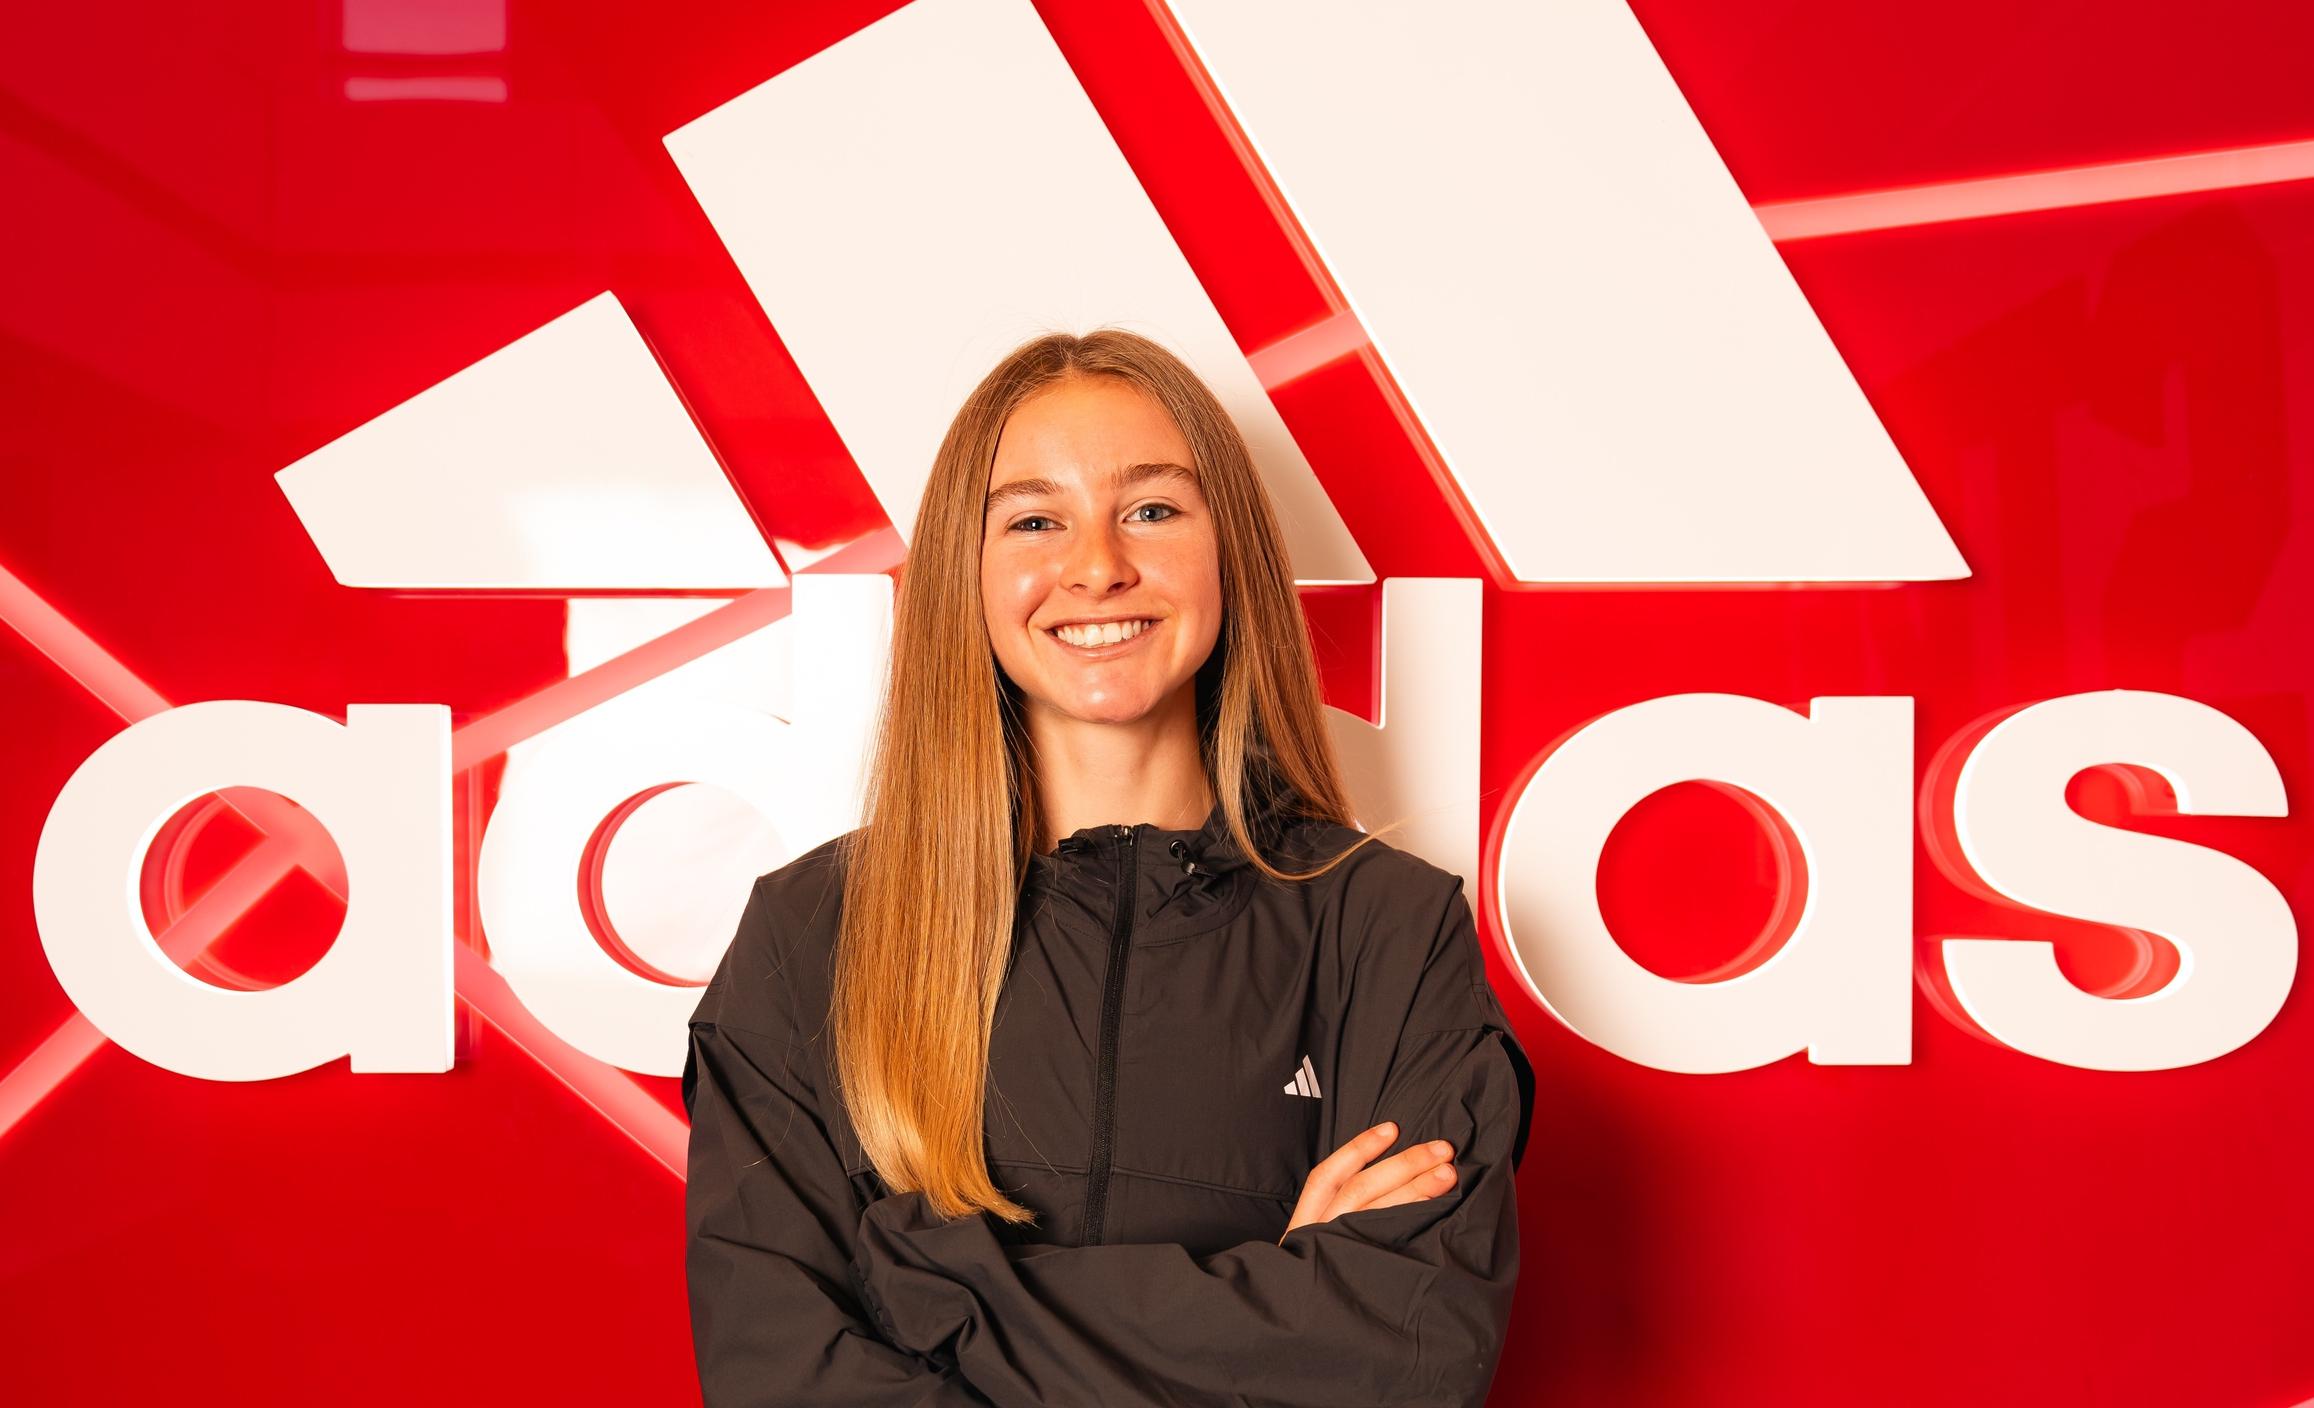 Katelyn Tuohy Turns Pro, Signs With Adidas